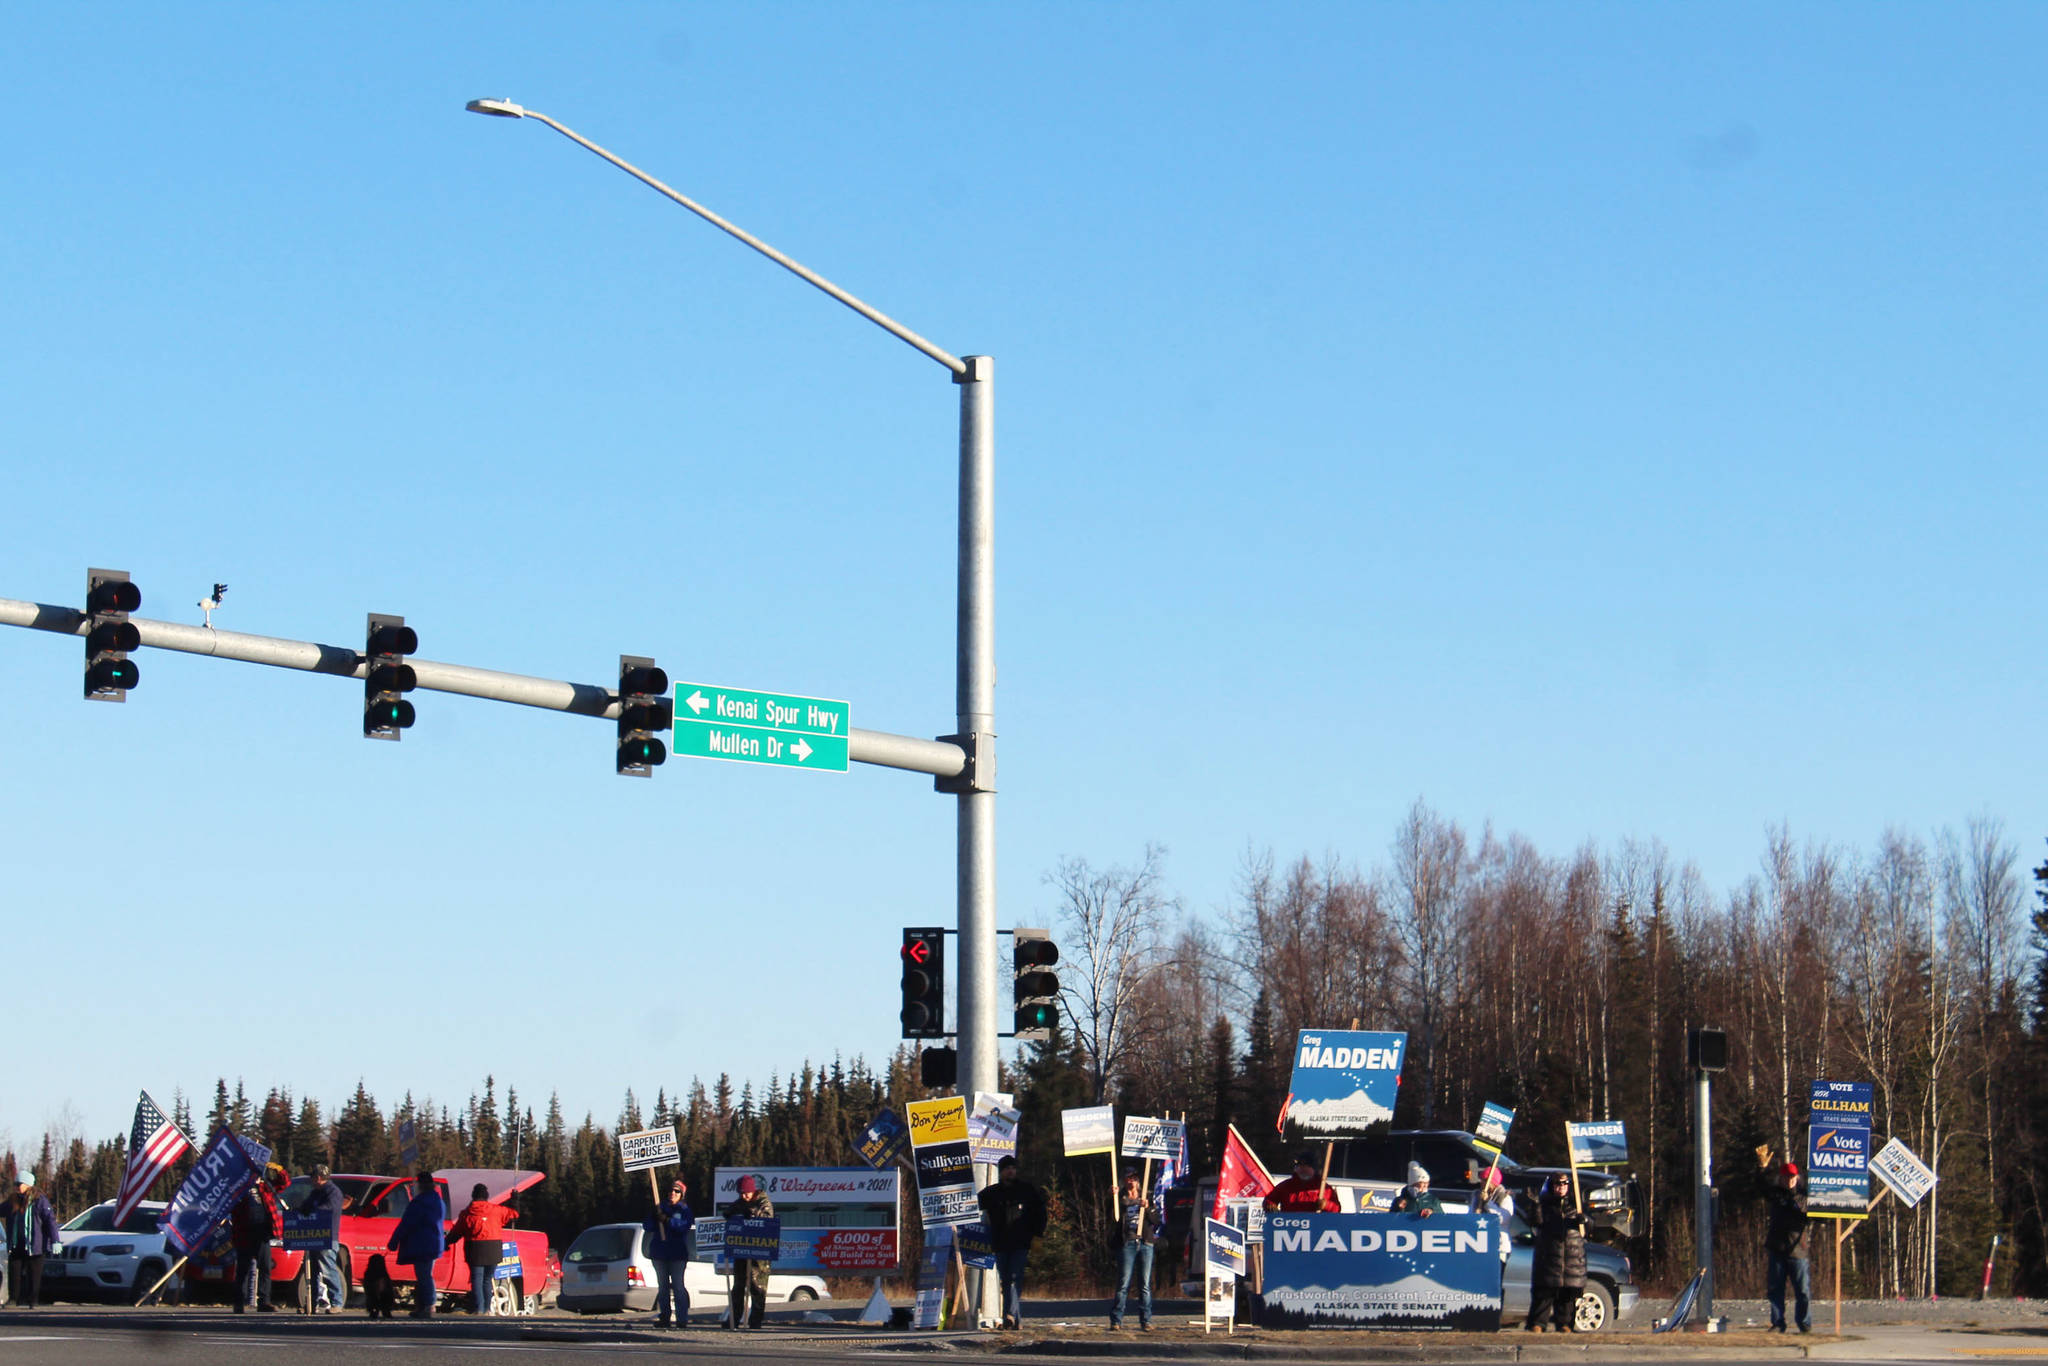 Supporters hold campaign signs at the intersection of Sterling Highway and Kenai Spur Highway on Tuesday, Nov. 3 in Soldotna, Alaska. (Photo by Ashlyn O’Hara/Peninsula Clarion)